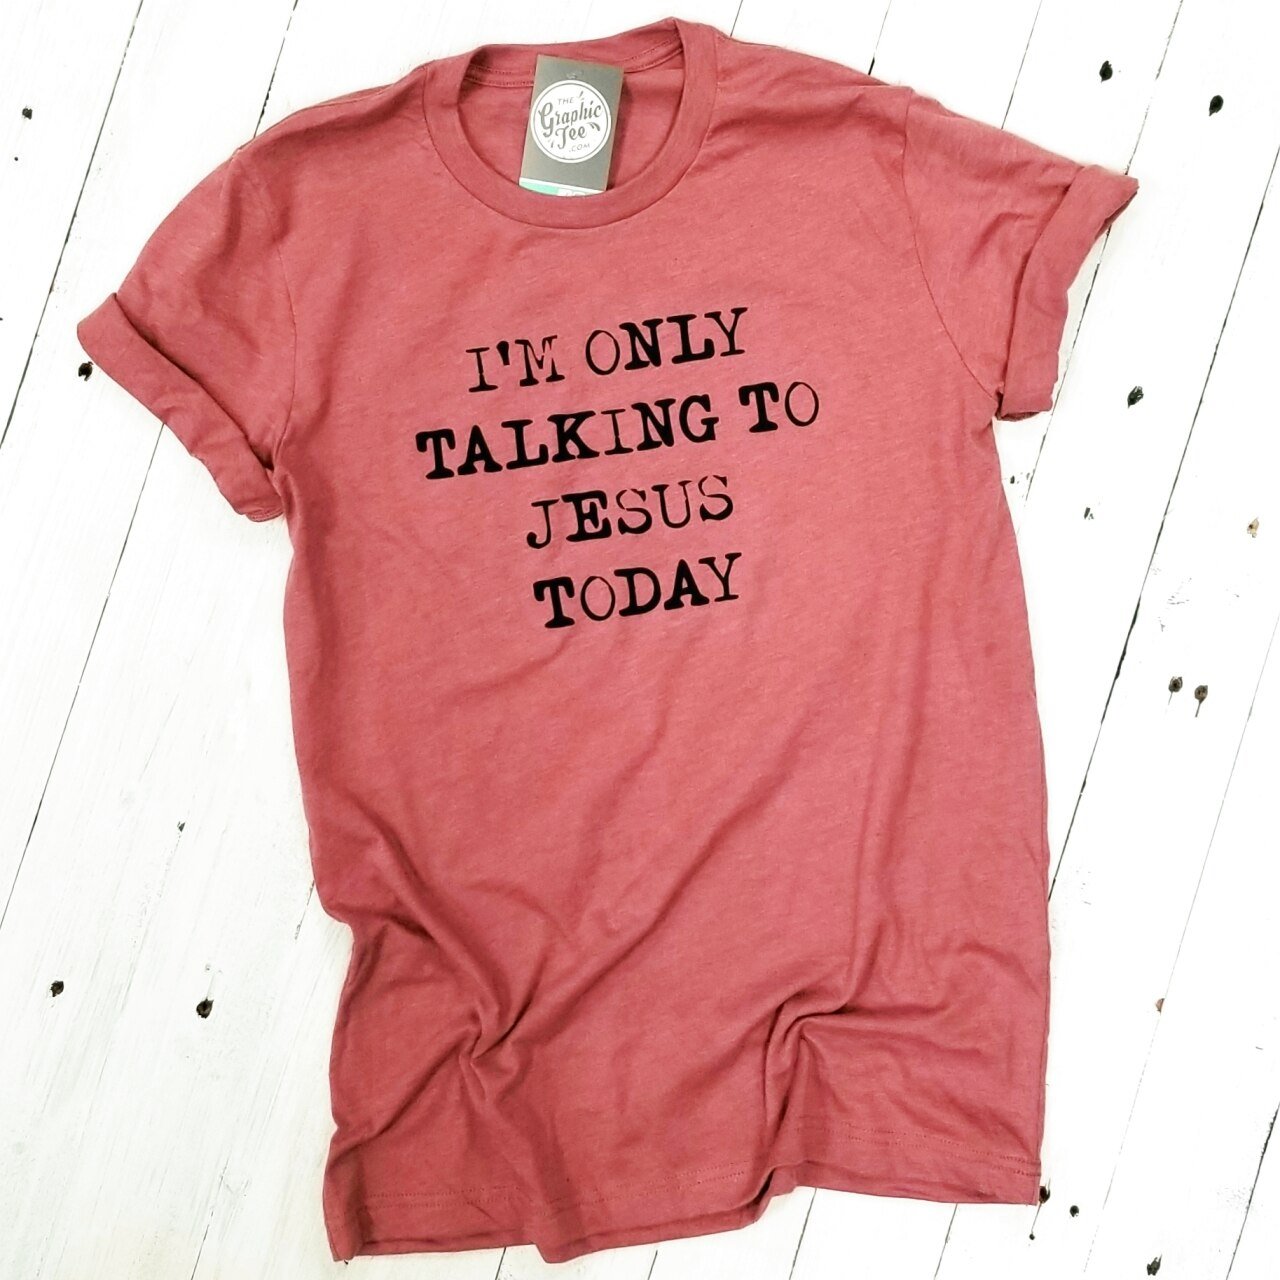 I'm Only Talking to Jesus Today - Unisex Tee - The Graphic Tee